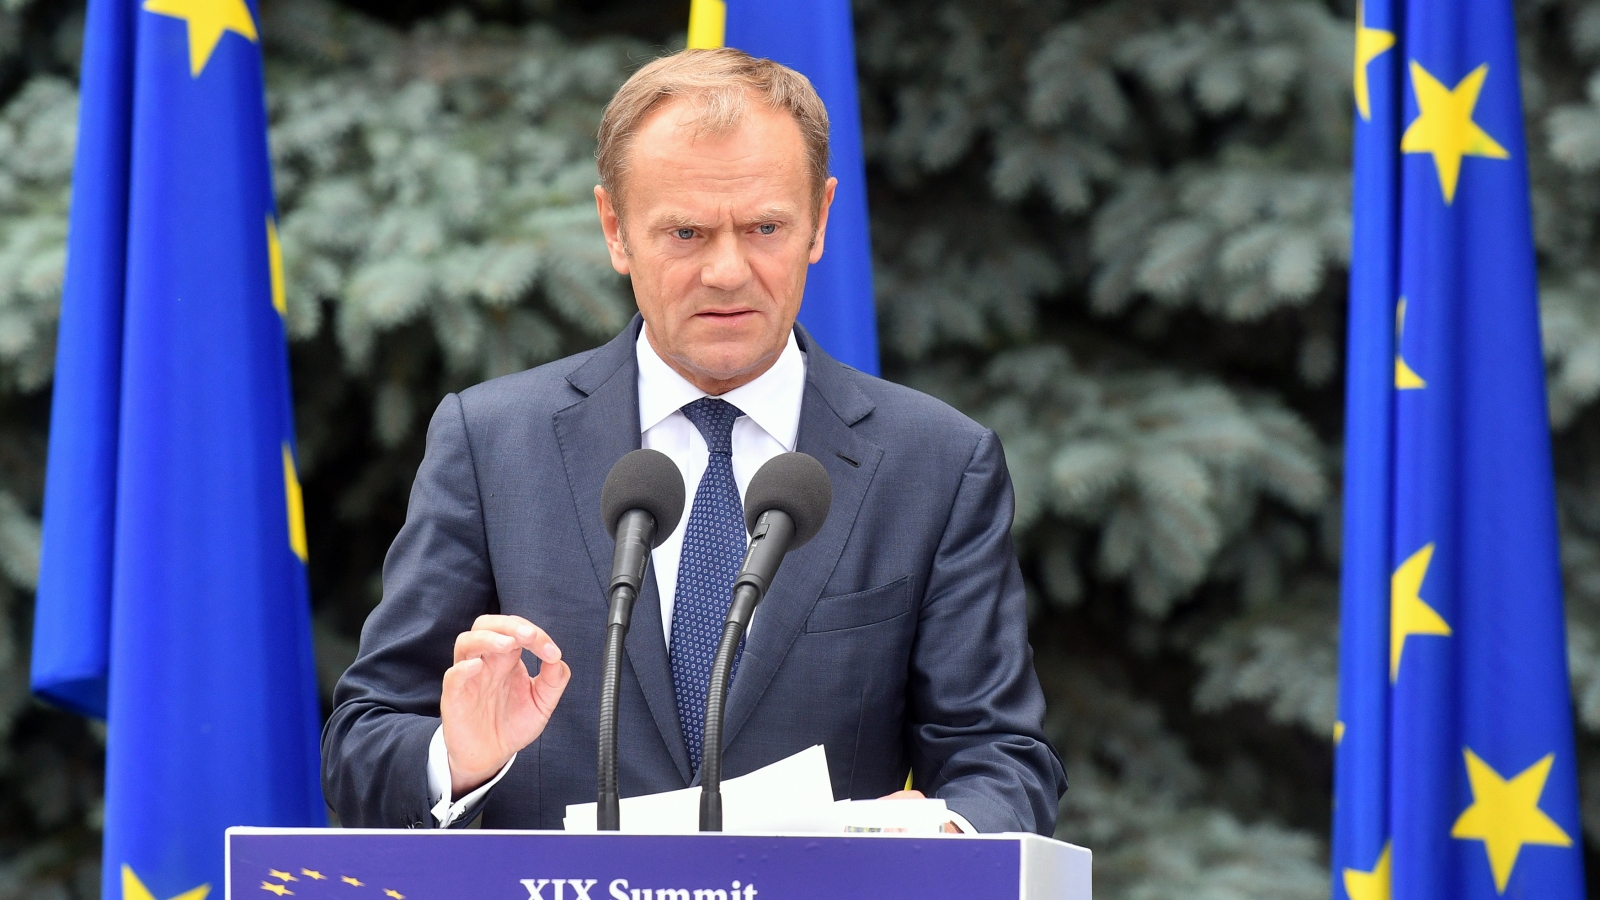 Donald Tusk: There is no military solution to Nagorno-Karabakh conflict but only a political settlement in accordance with international law and principles